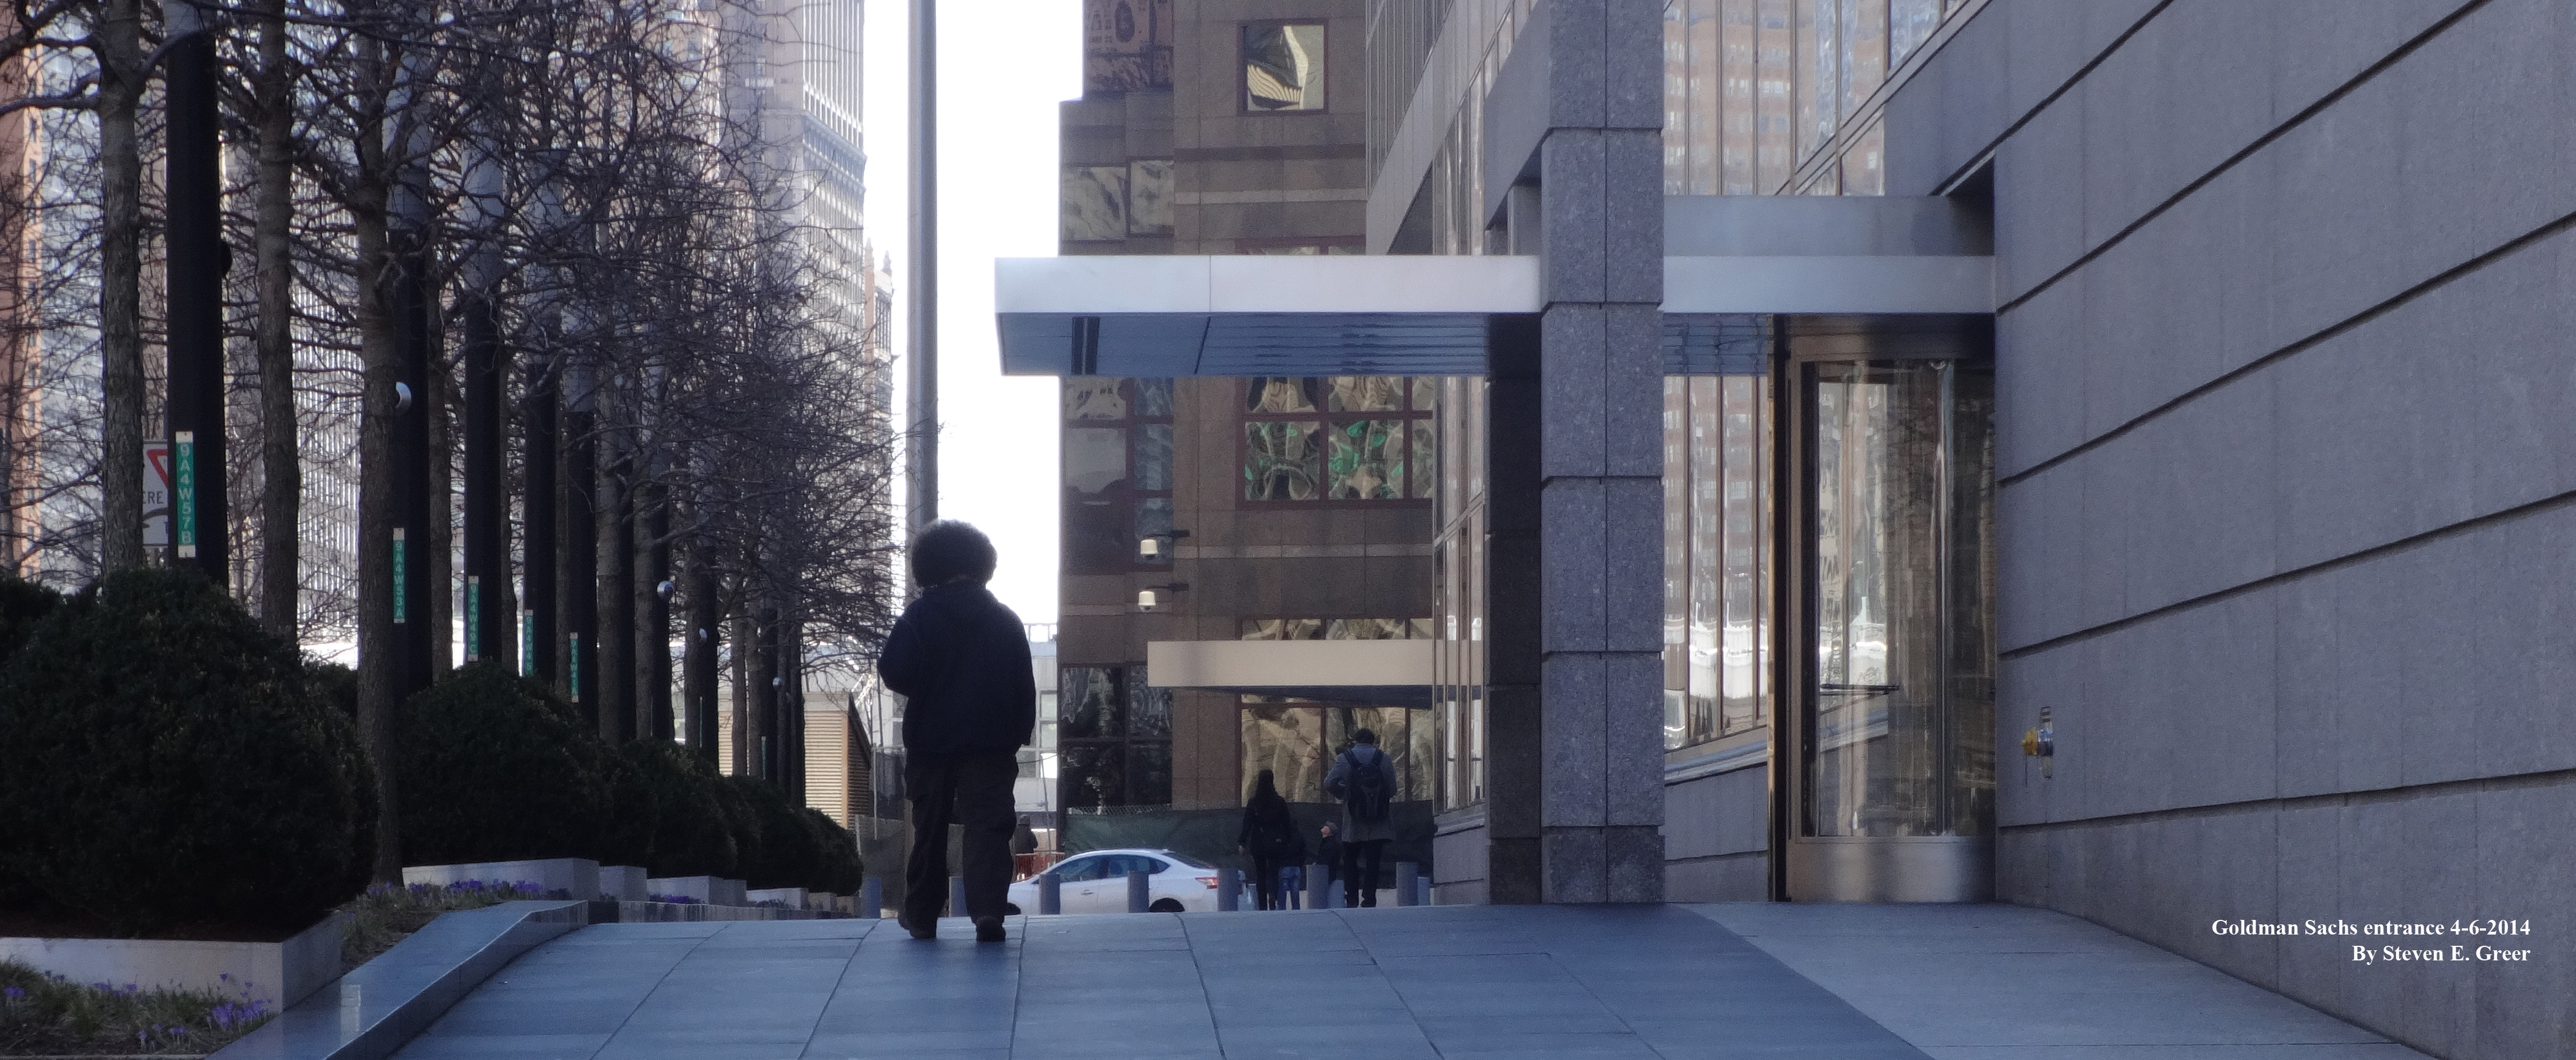 Goldman Sachs entrance with Afro